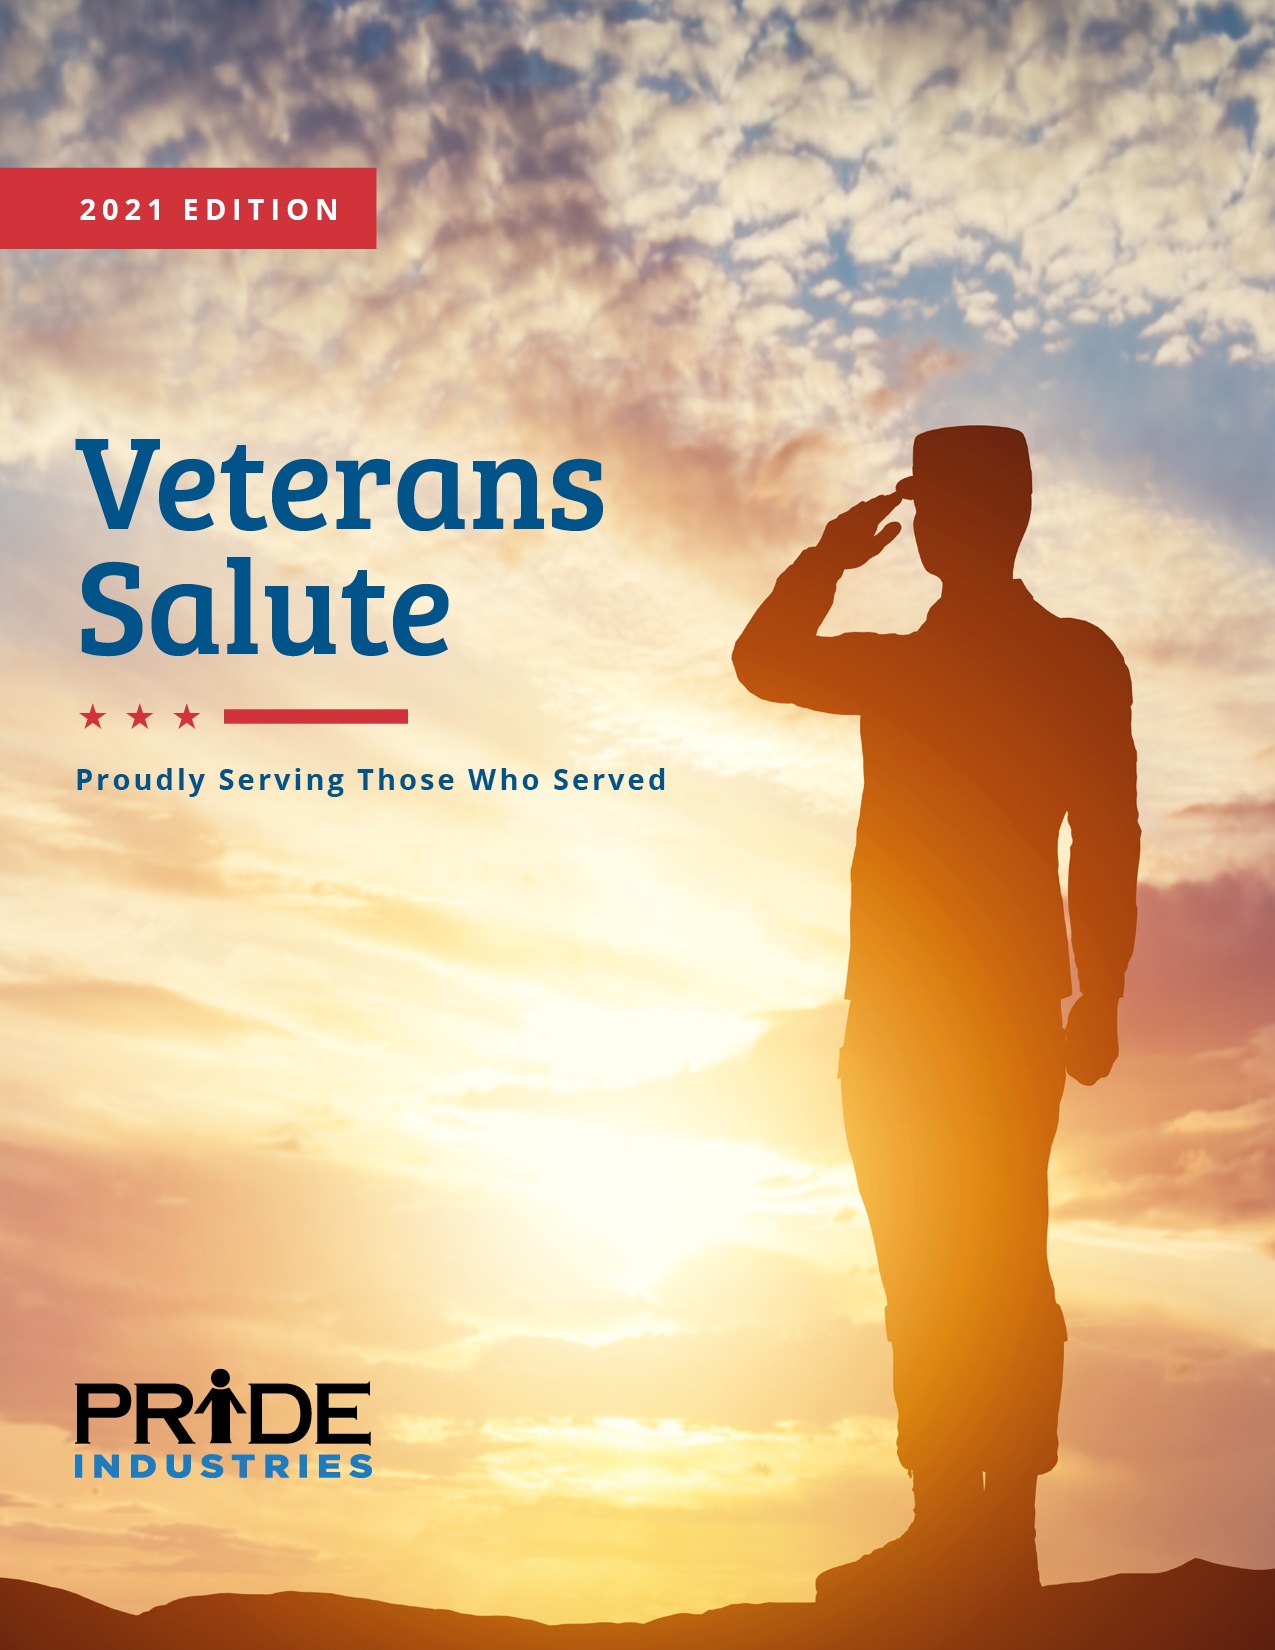 Photo of the cover of PRIDE Industries 2021 Veterans Salute publication